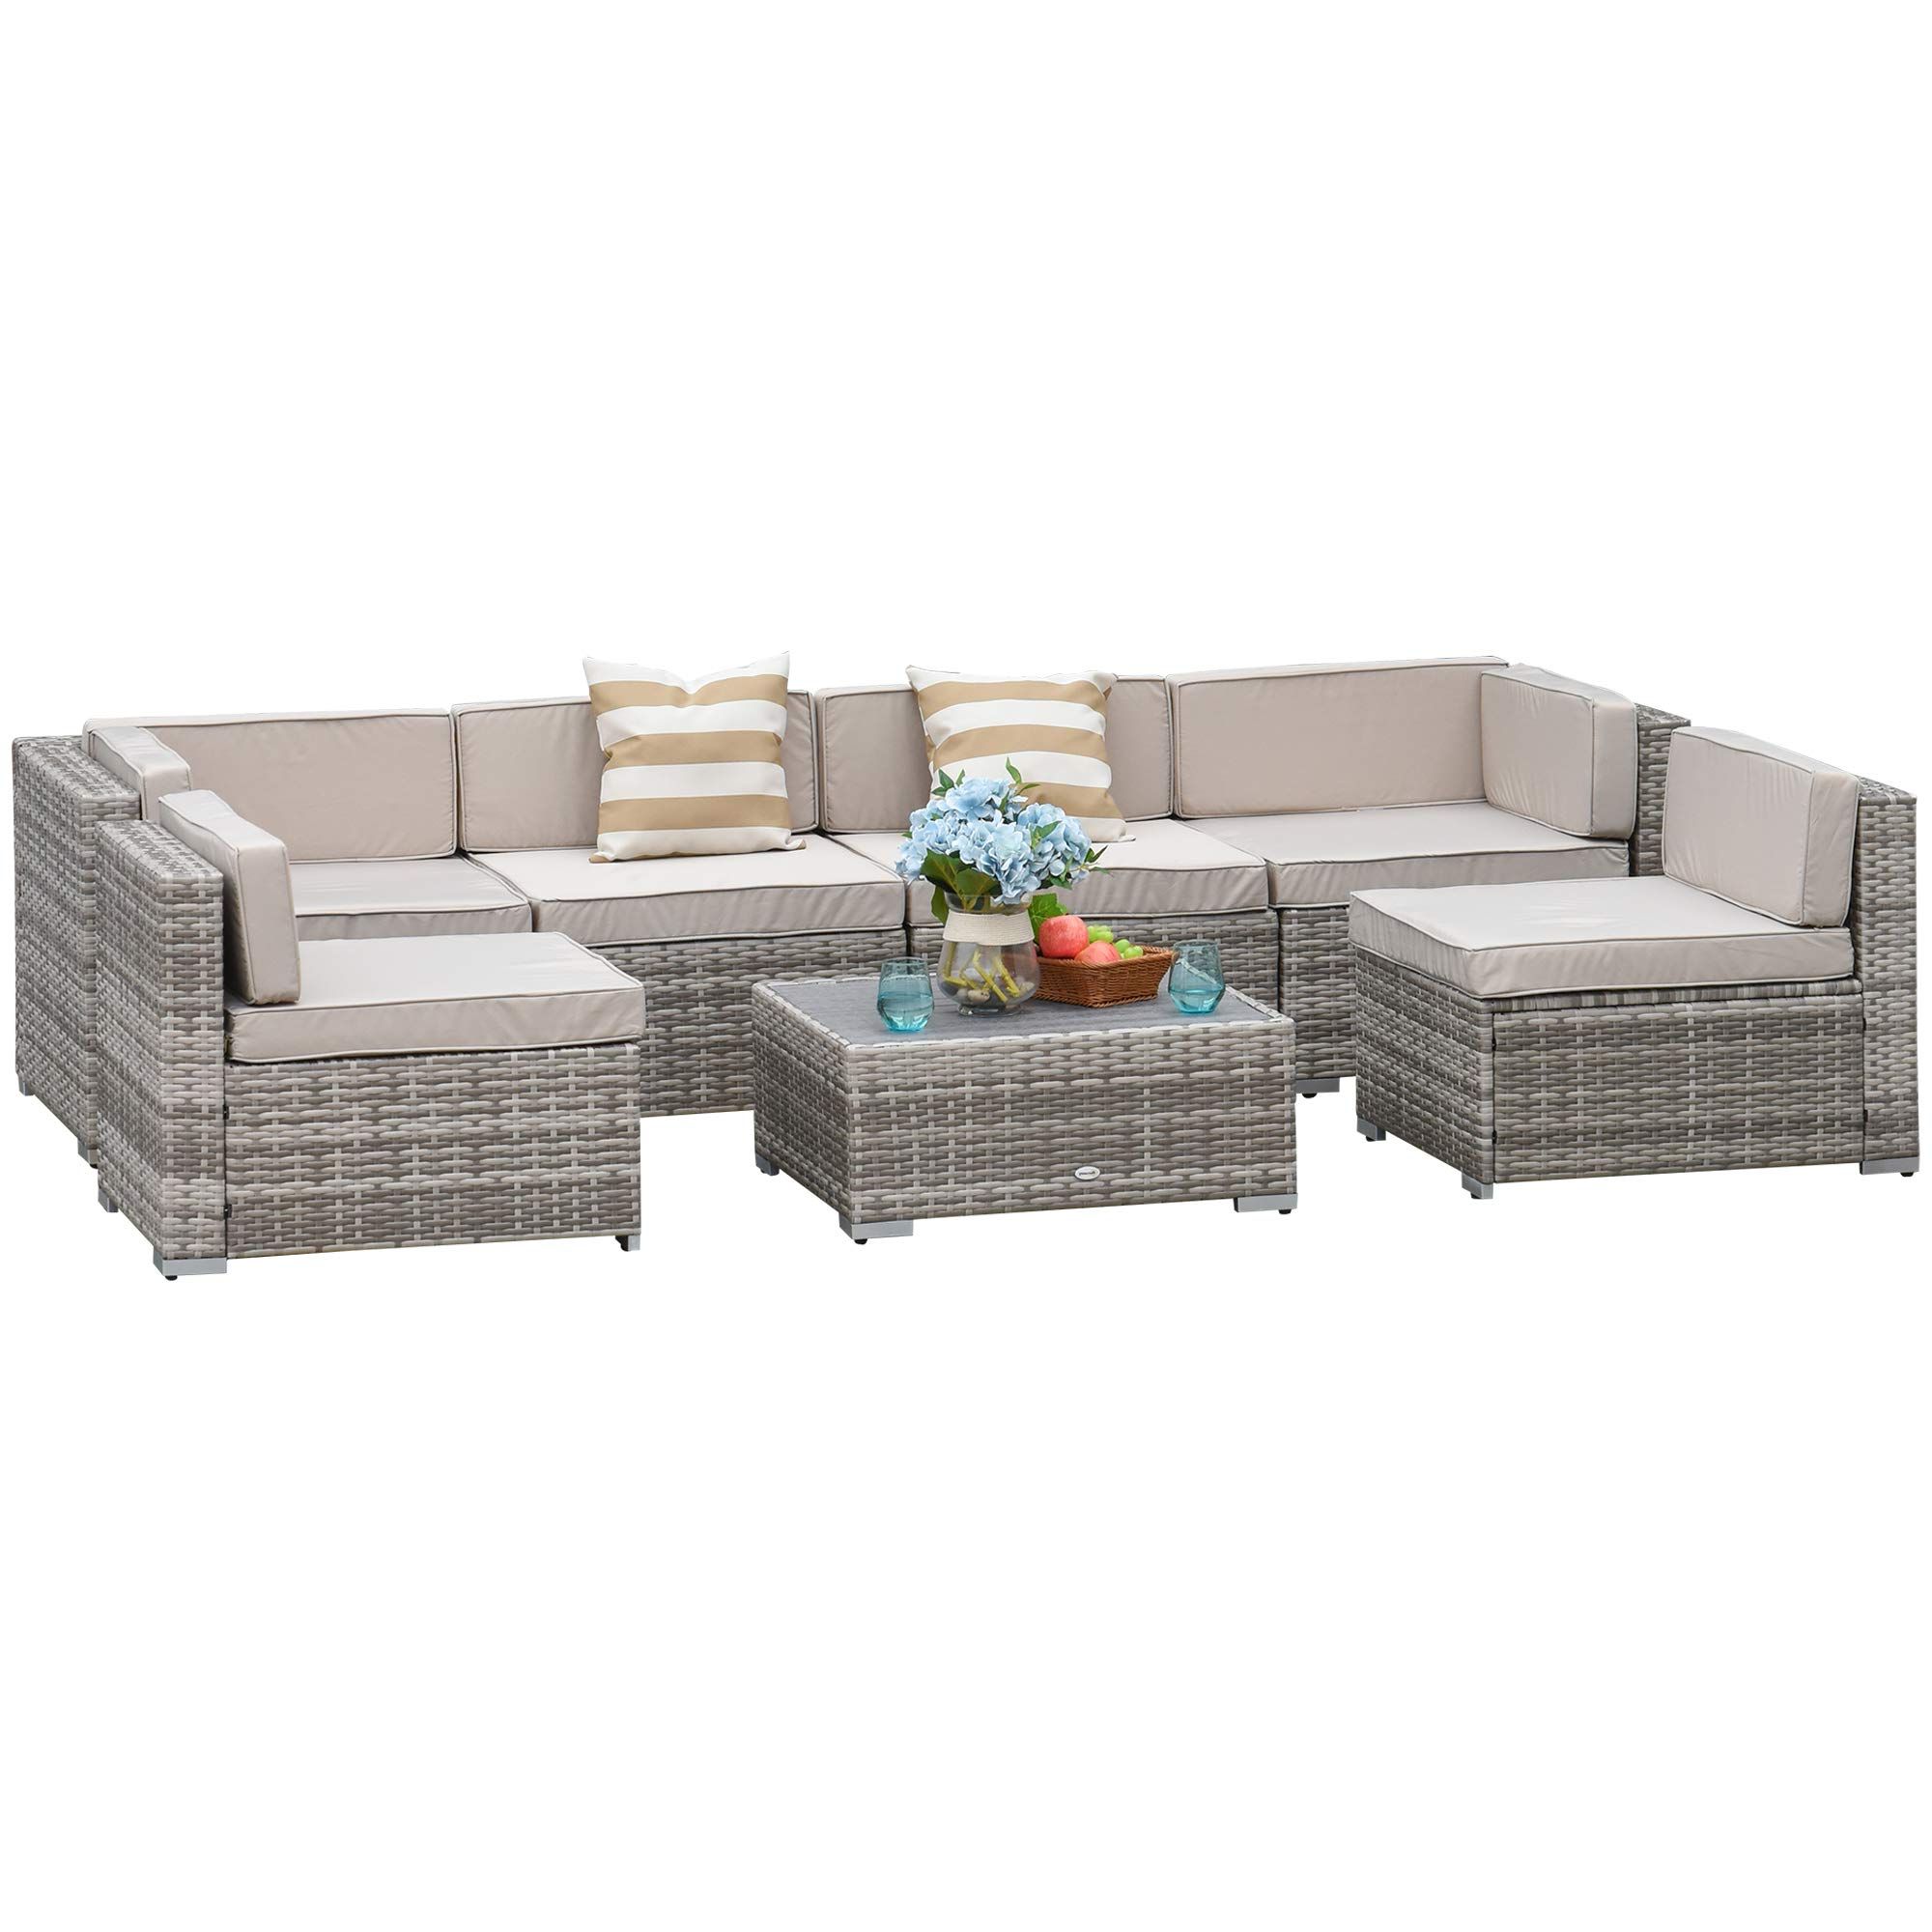 Amazon: Outsunny 7 Piece Outdoor Patio Furniture Set, Pe Rattan Wicker Sectional  Sofa Patio Conversation Sets With Couch Cushions, Throw Pillows And Slat  Coffee Table, Stripe, Beige : Patio, Lawn & Garden With Well Liked Outdoor Couch Cushions, Throw Pillows And Slat Coffee Table (View 4 of 15)